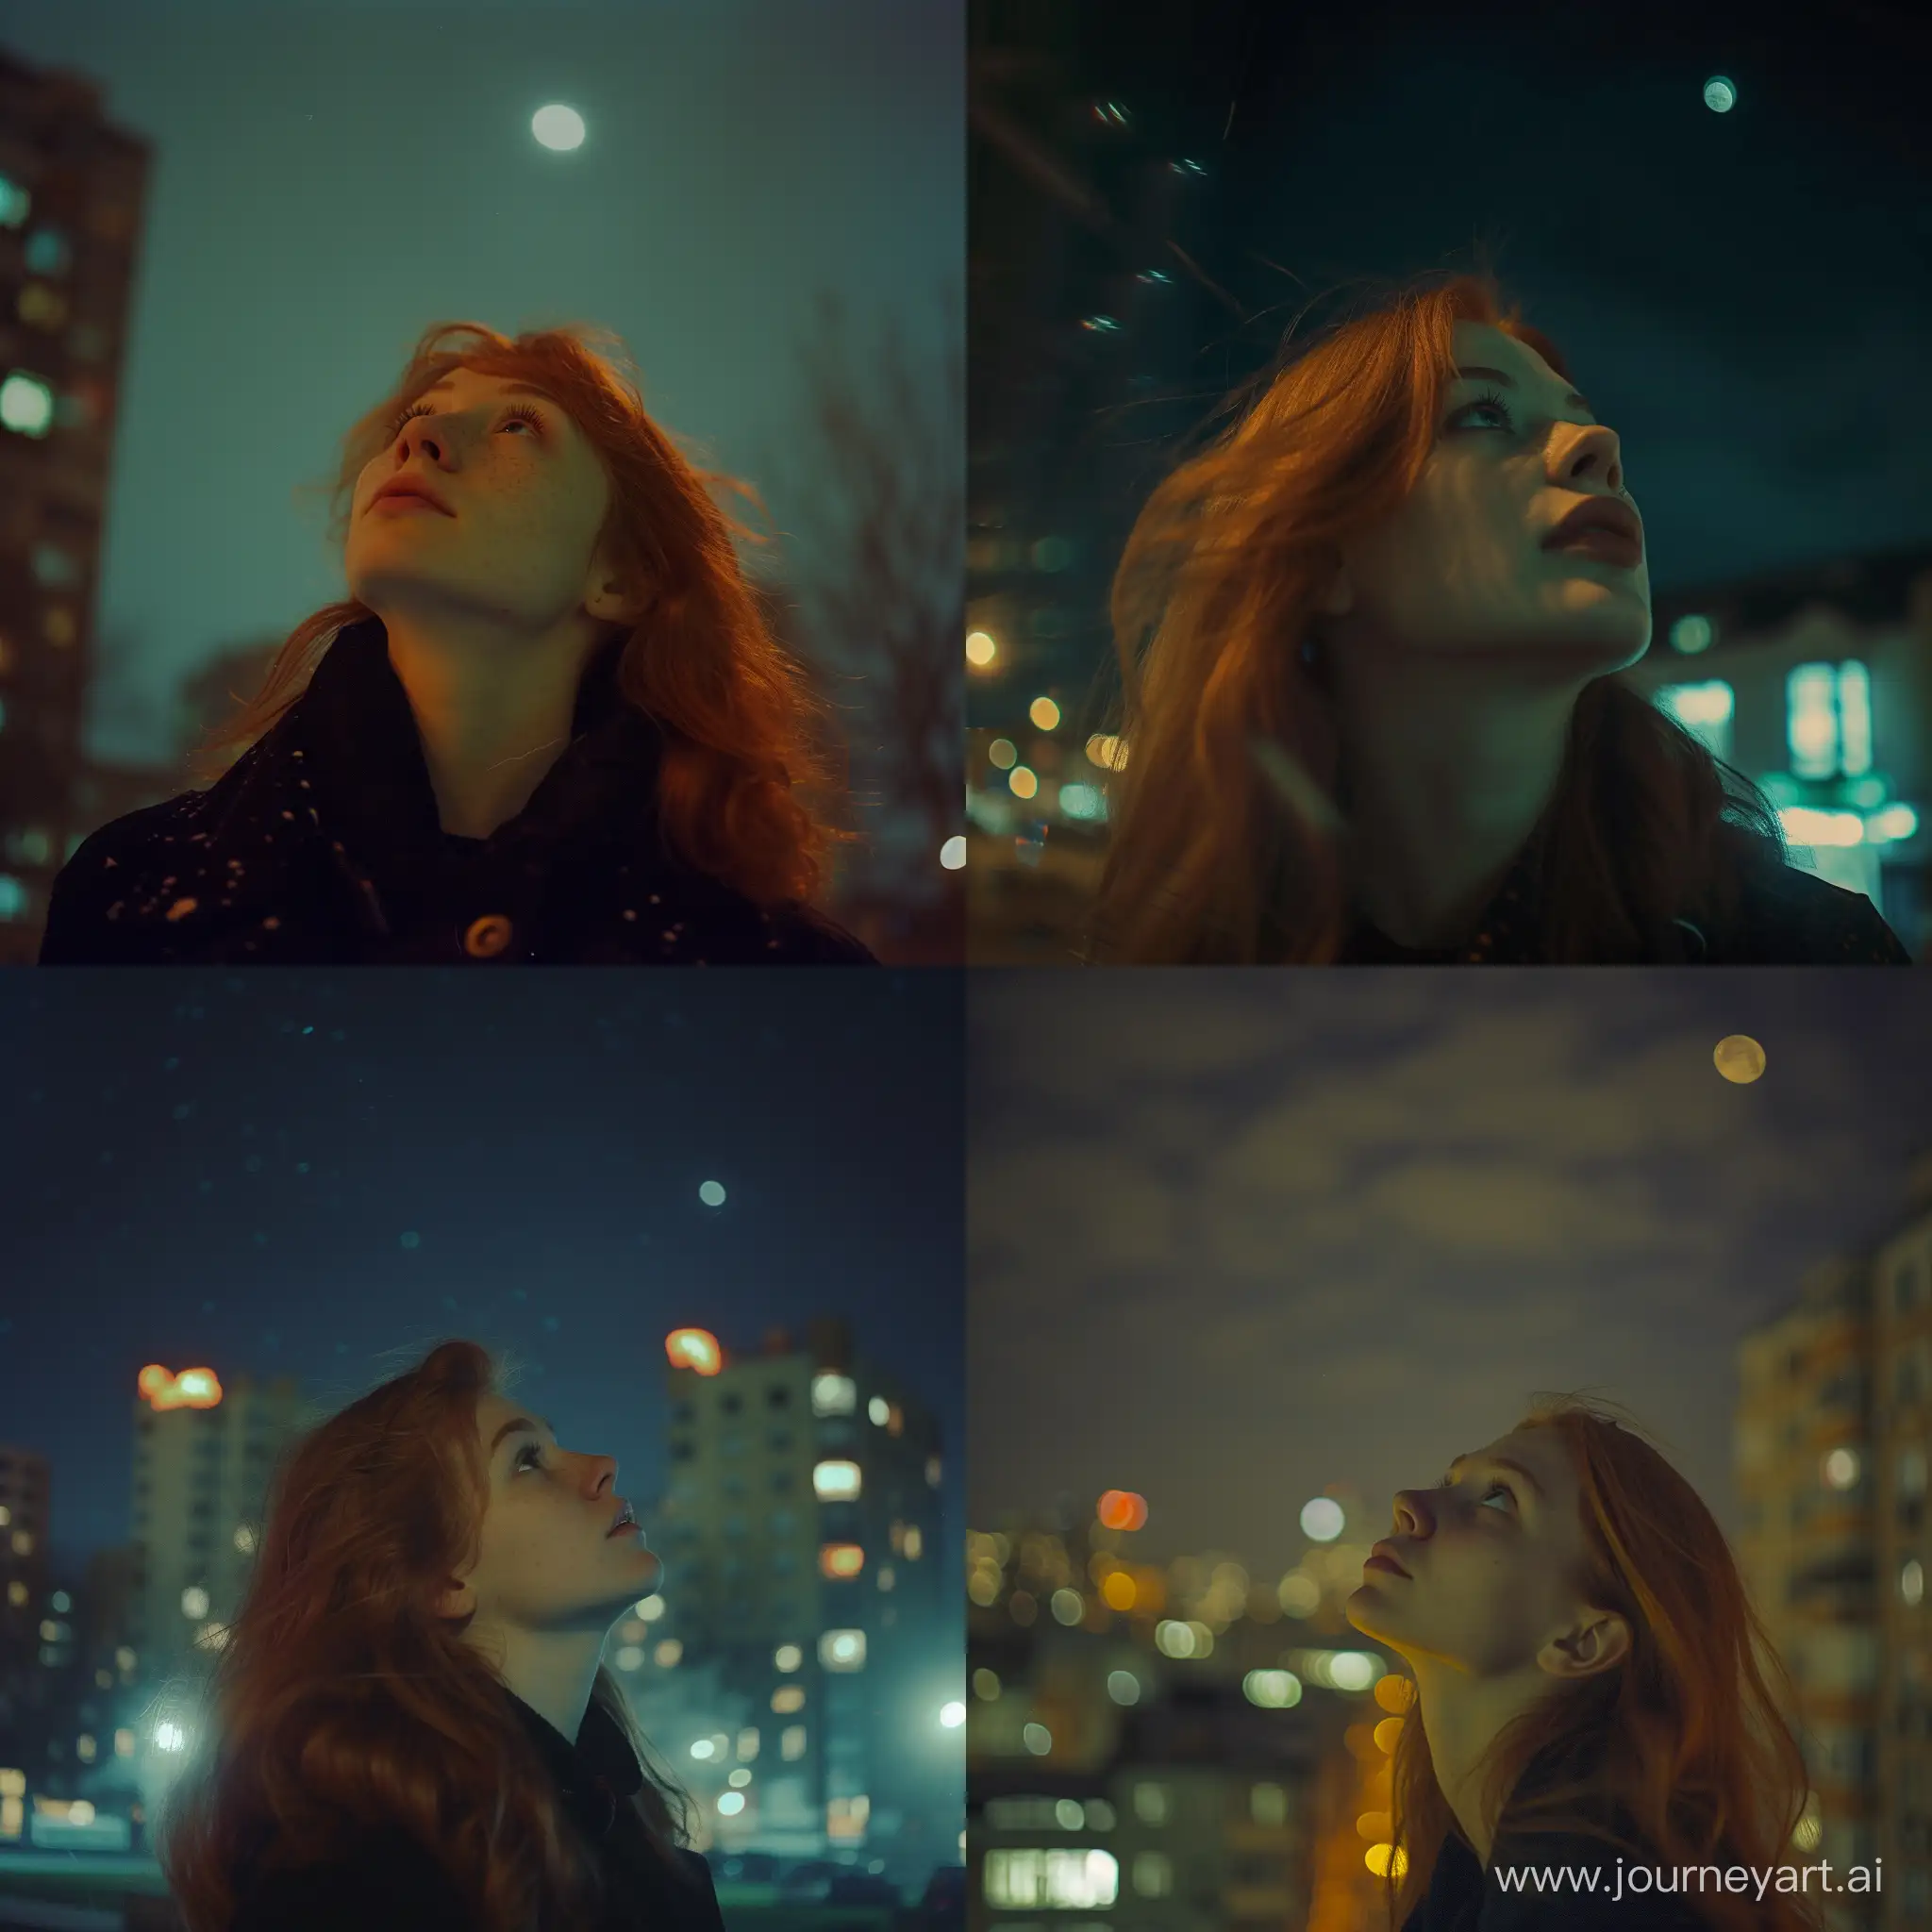 redhead looking into the skies, post-punk dark vibe, night, urban wide-shot with buildings in the background somewhat blurry, photo with 16mm, looks like part of the music video. noisy photo, night lighting and moon blurred into the skies